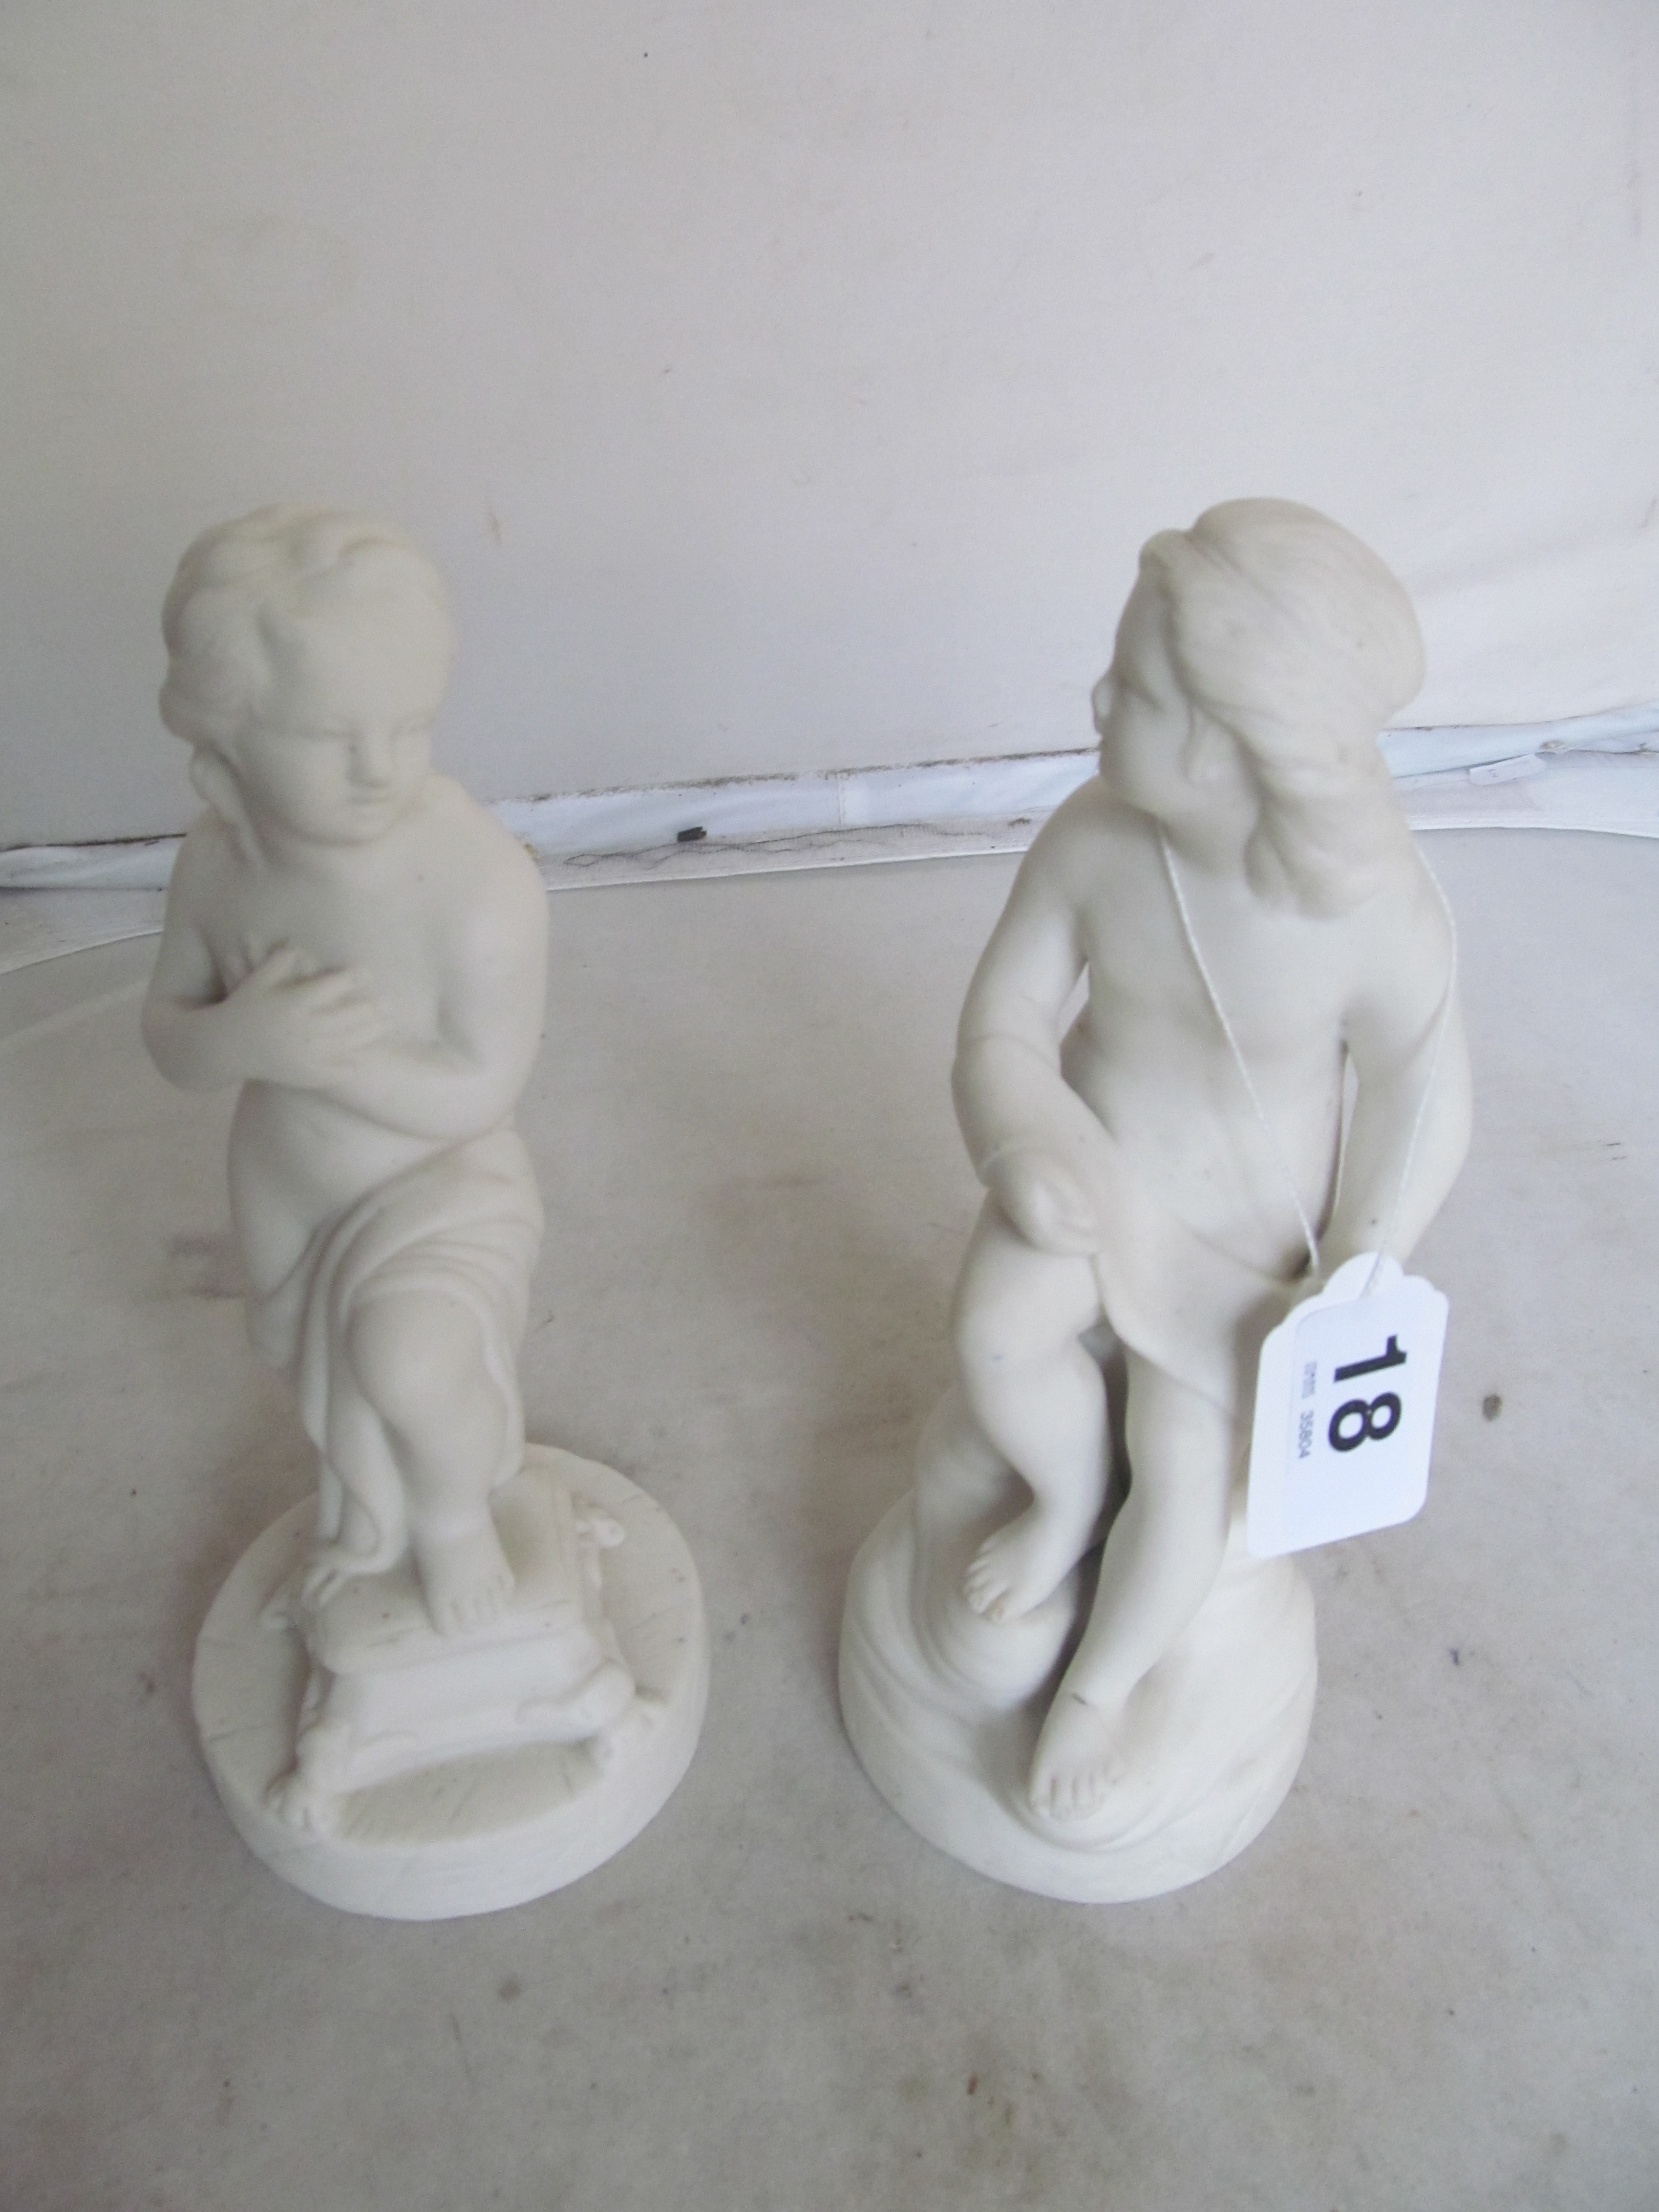 A pair of bisque figures